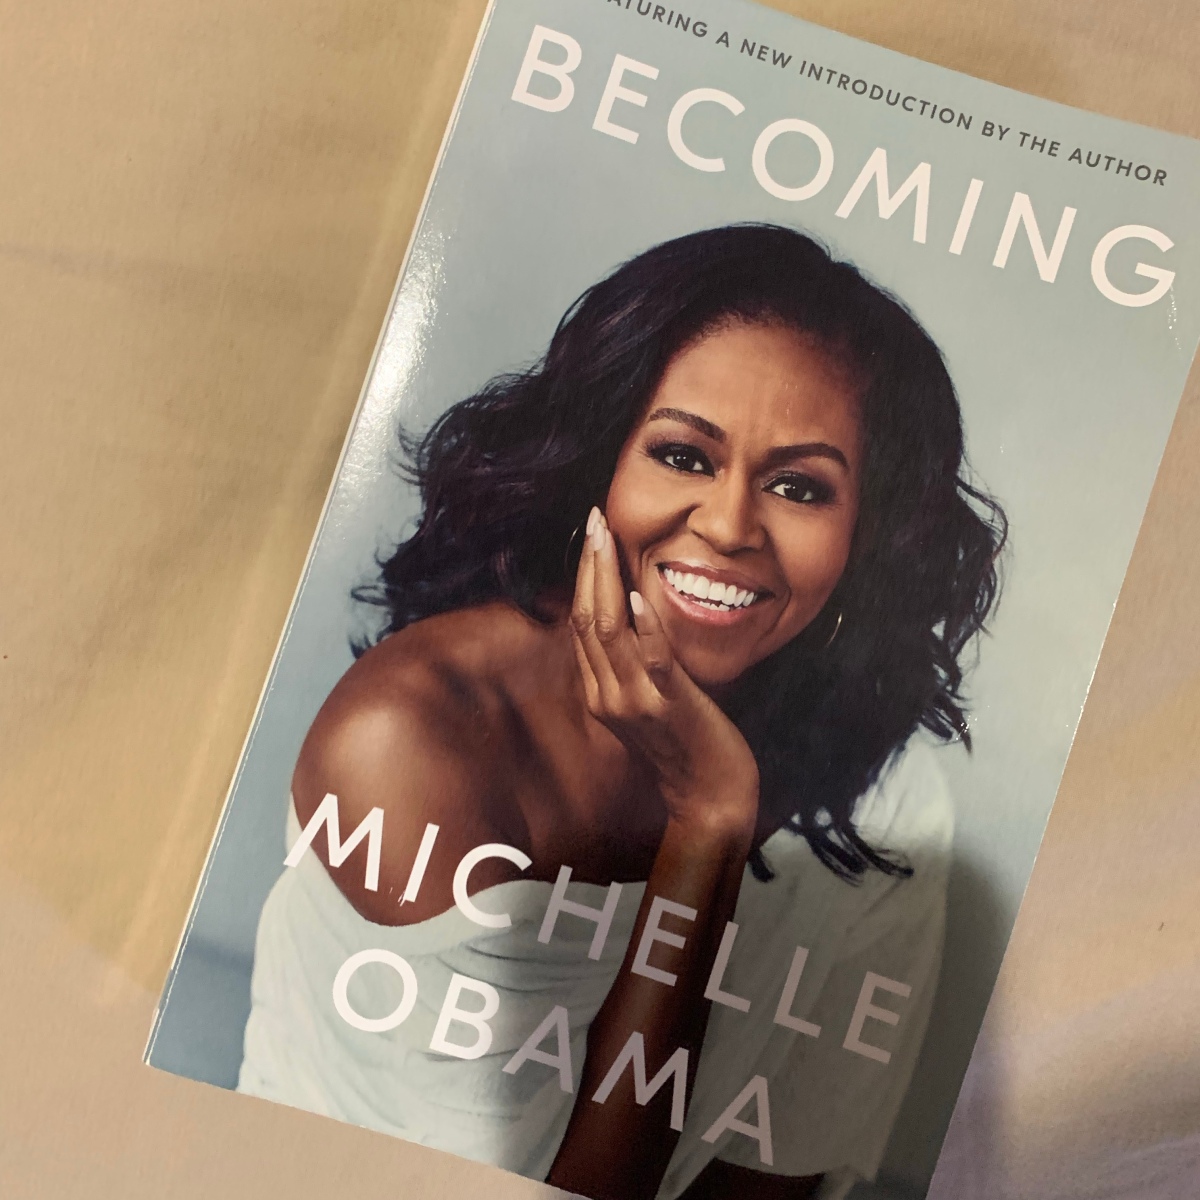 ‘Becoming’ by Michelle Obama